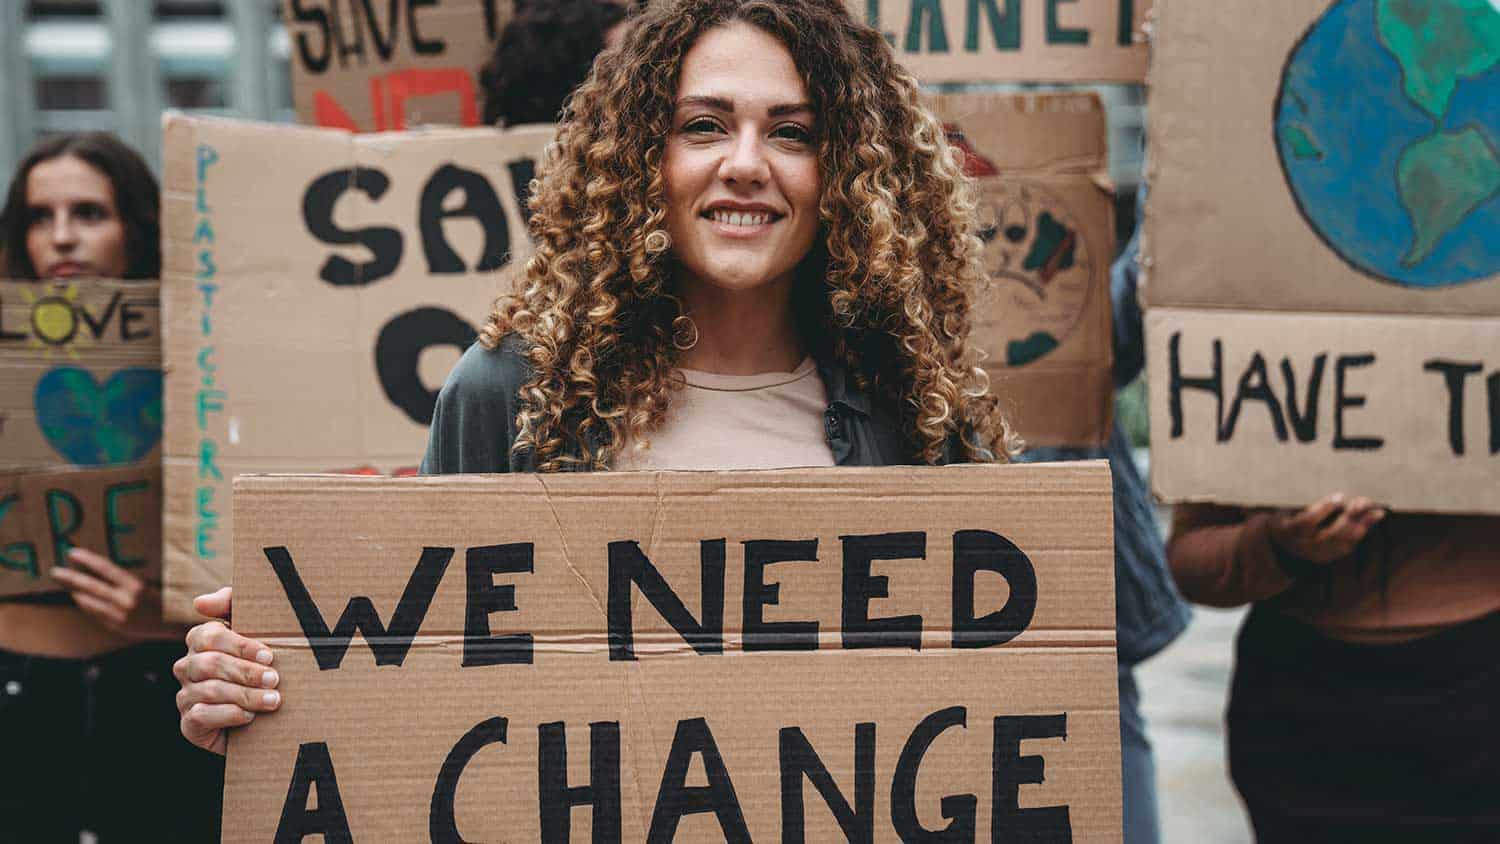 Climate campaigner with a 'we need change' sign